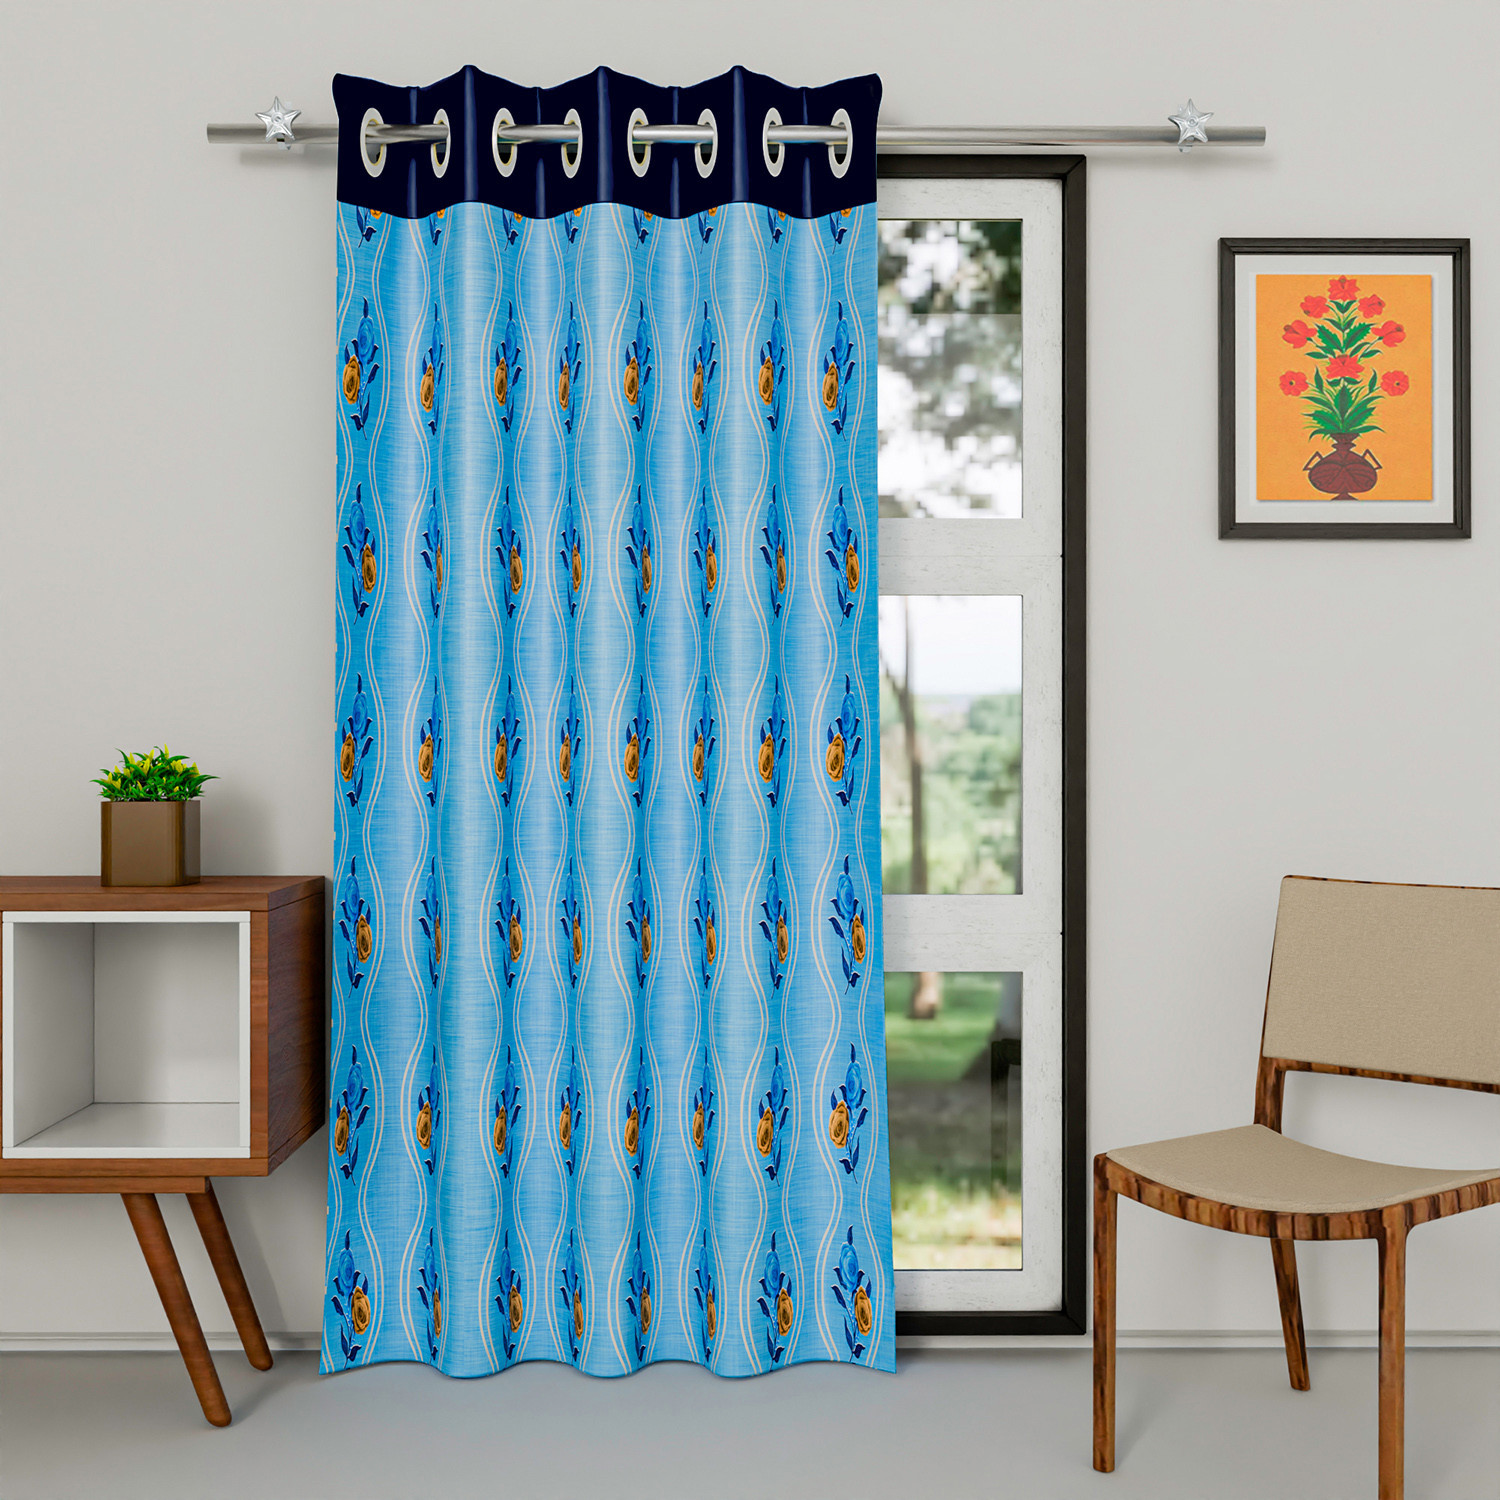 Kuber Industries Polyester Decorative 7 Feet Door Curtain | Rose Print Blackout Drapes Curtain With 8 Eyelet For Home & Office (Sky Blue)